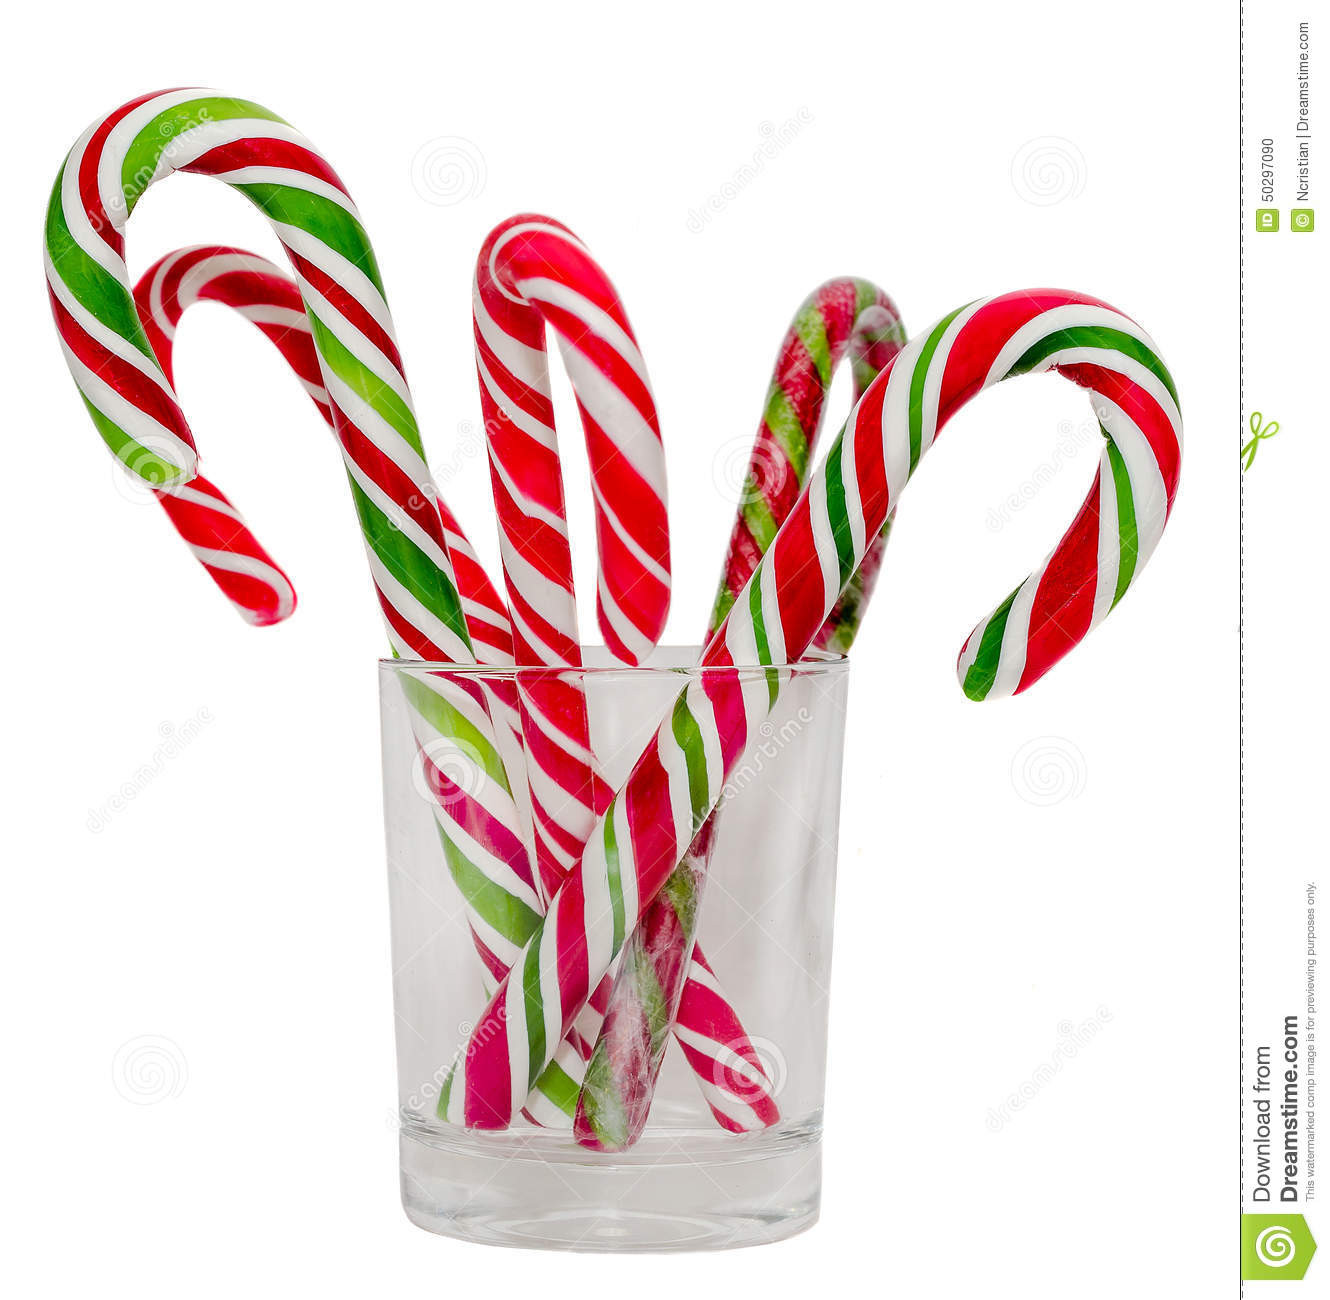 Christmas Candy Sticks
 Colored Candy Sticks And Christmas Lollipops In A